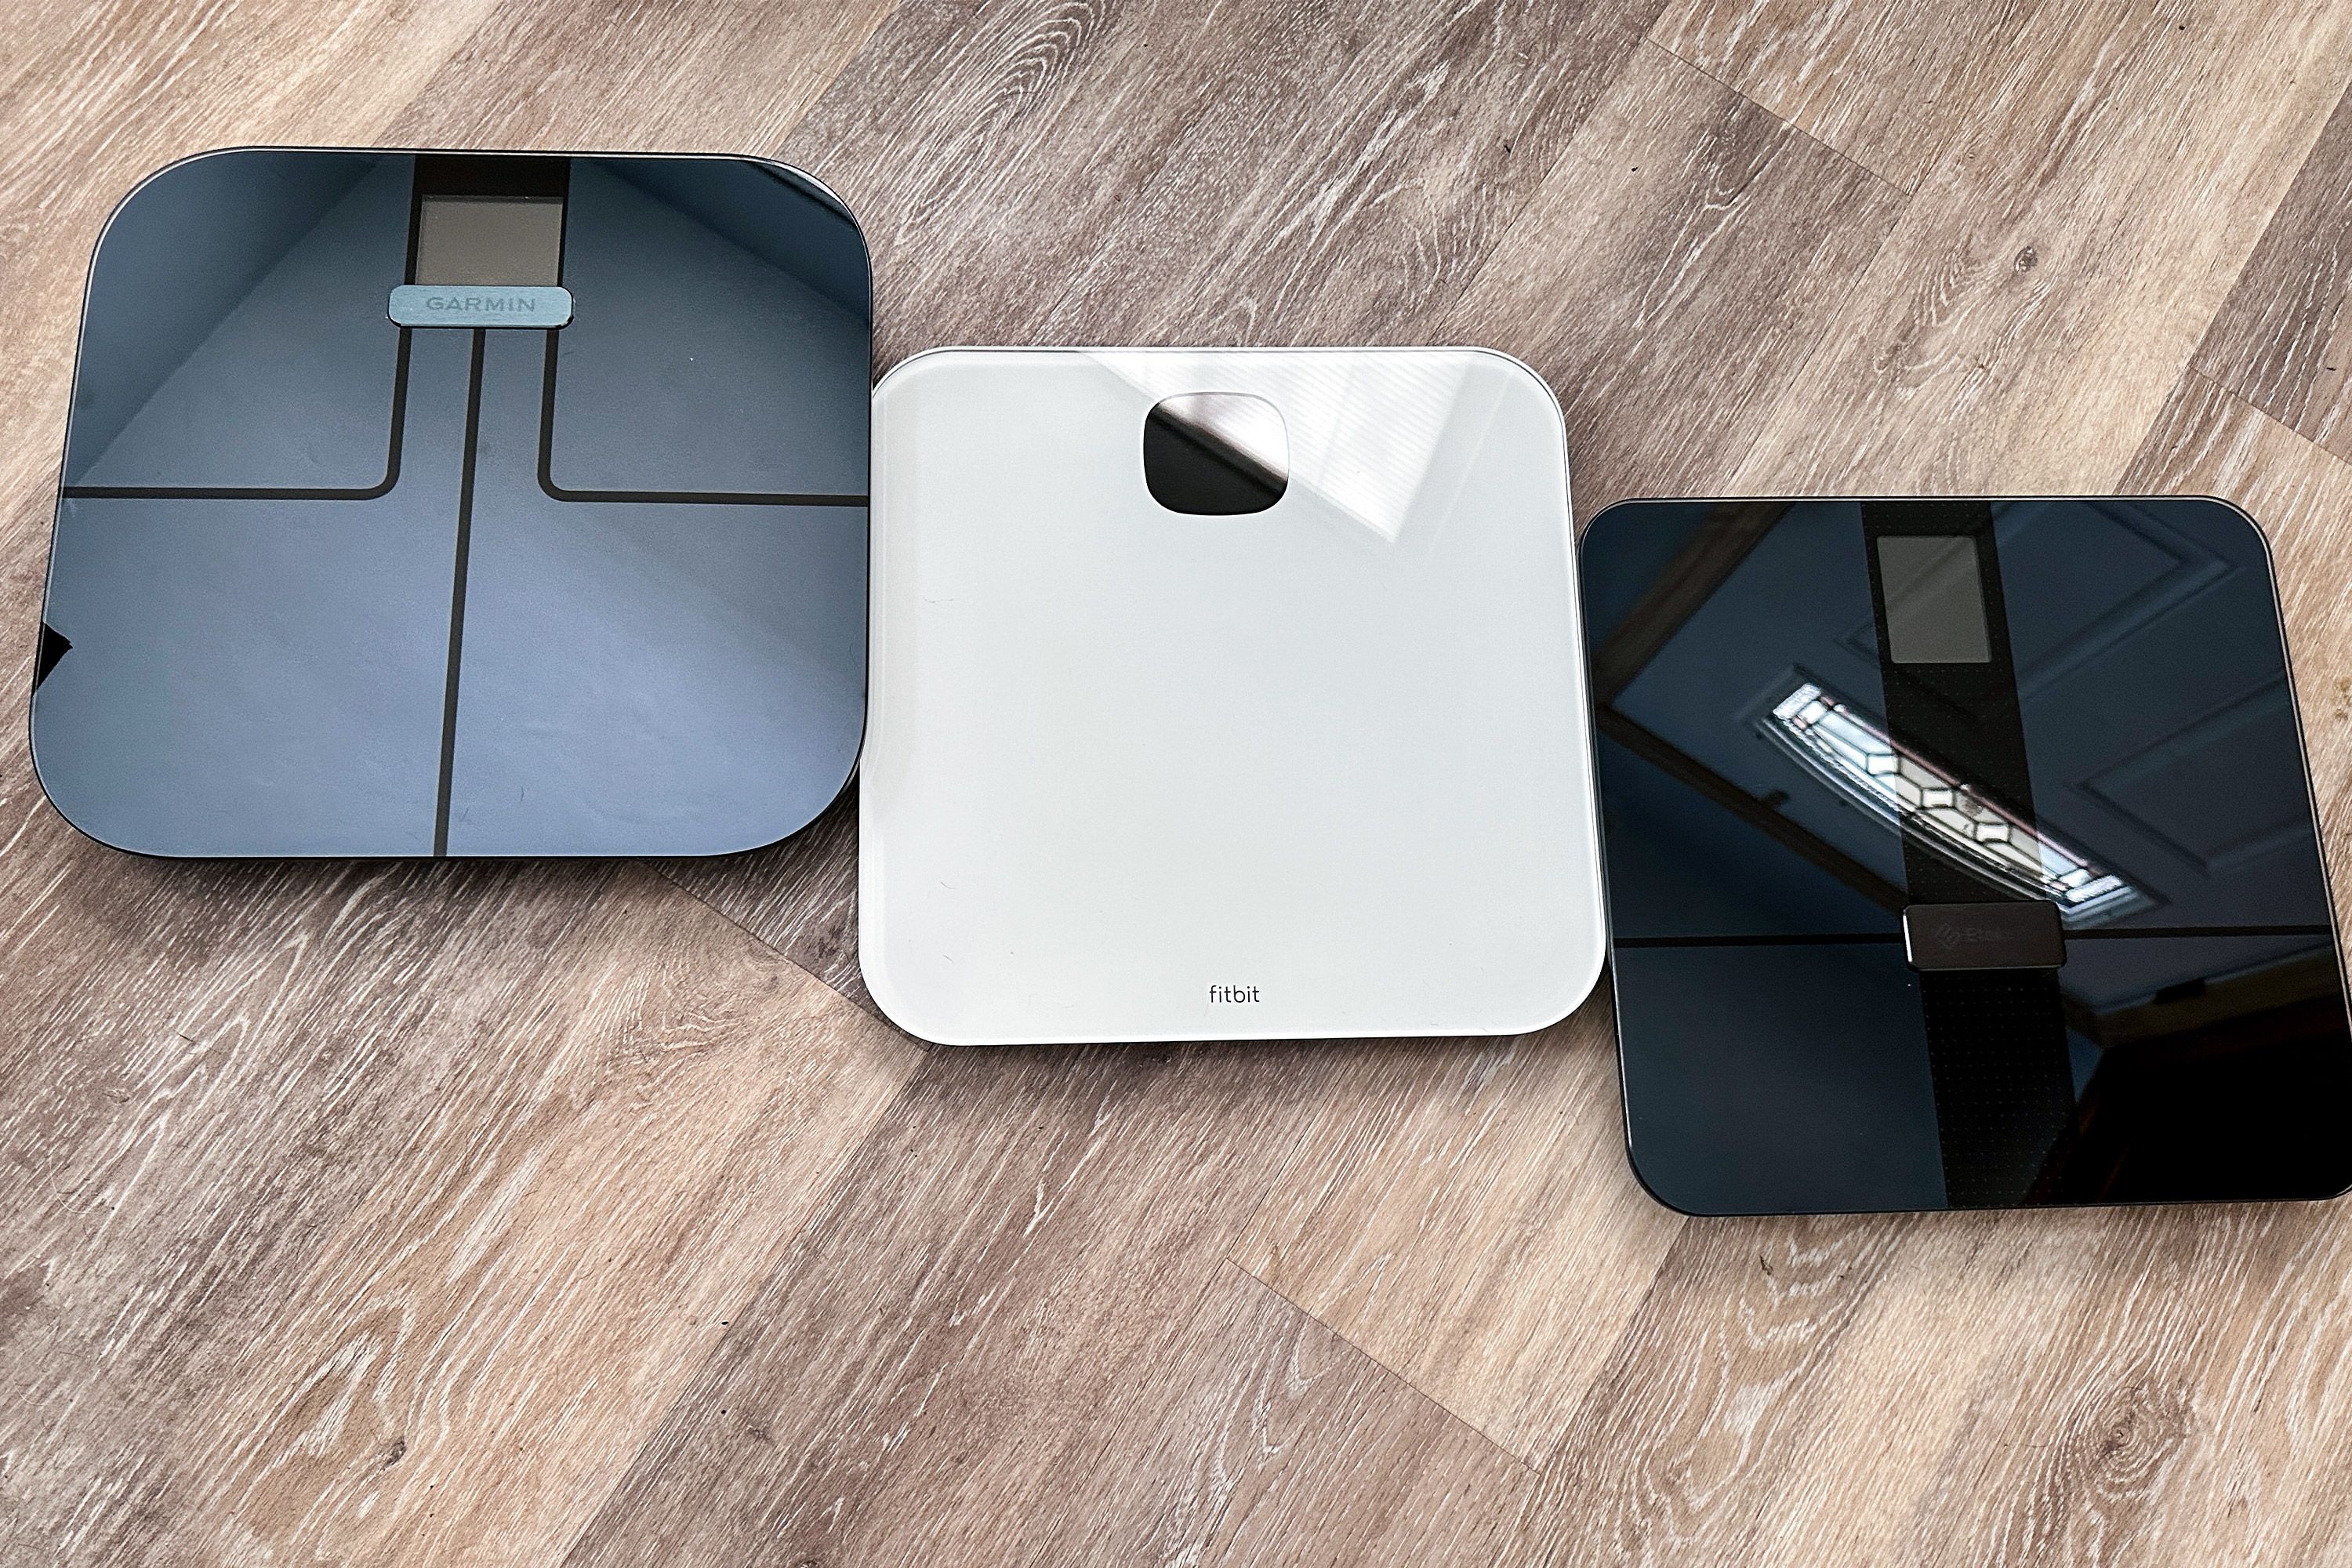 Which smart scales are compatible with Fitbit?